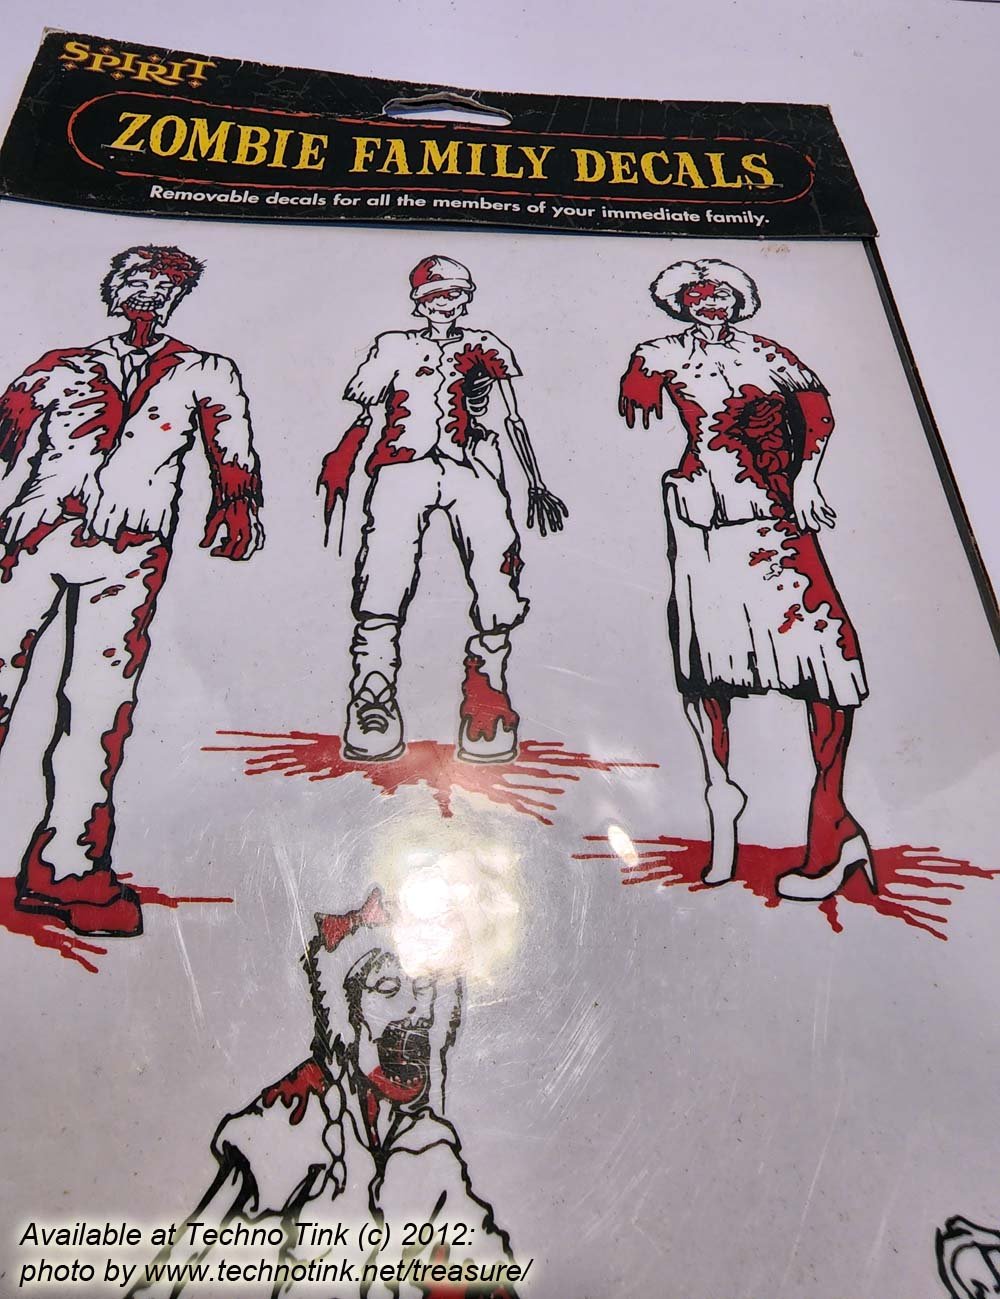 Revell 9457 Bsa Pwd Peel & Stick Decal Zombie